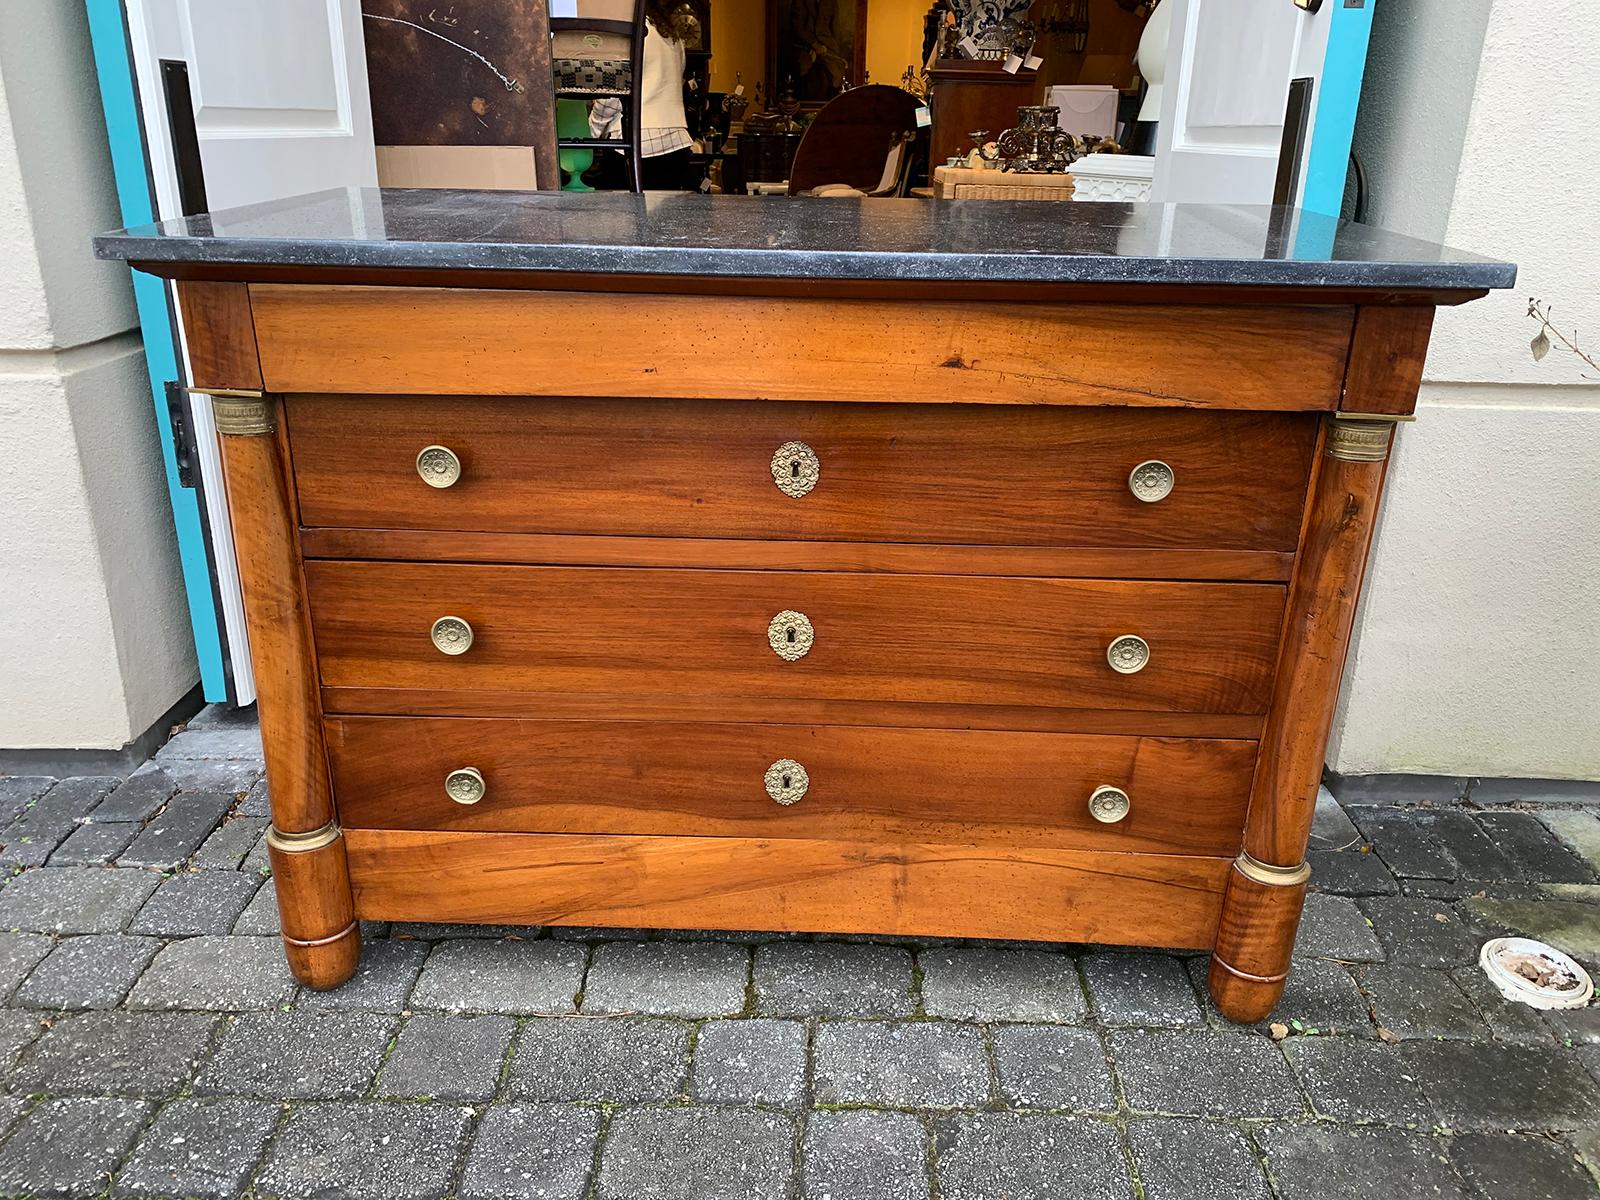 19th century French Empire walnut commode / chest with old fossilized marble top. Four drawers.
Marble top measures 51.25